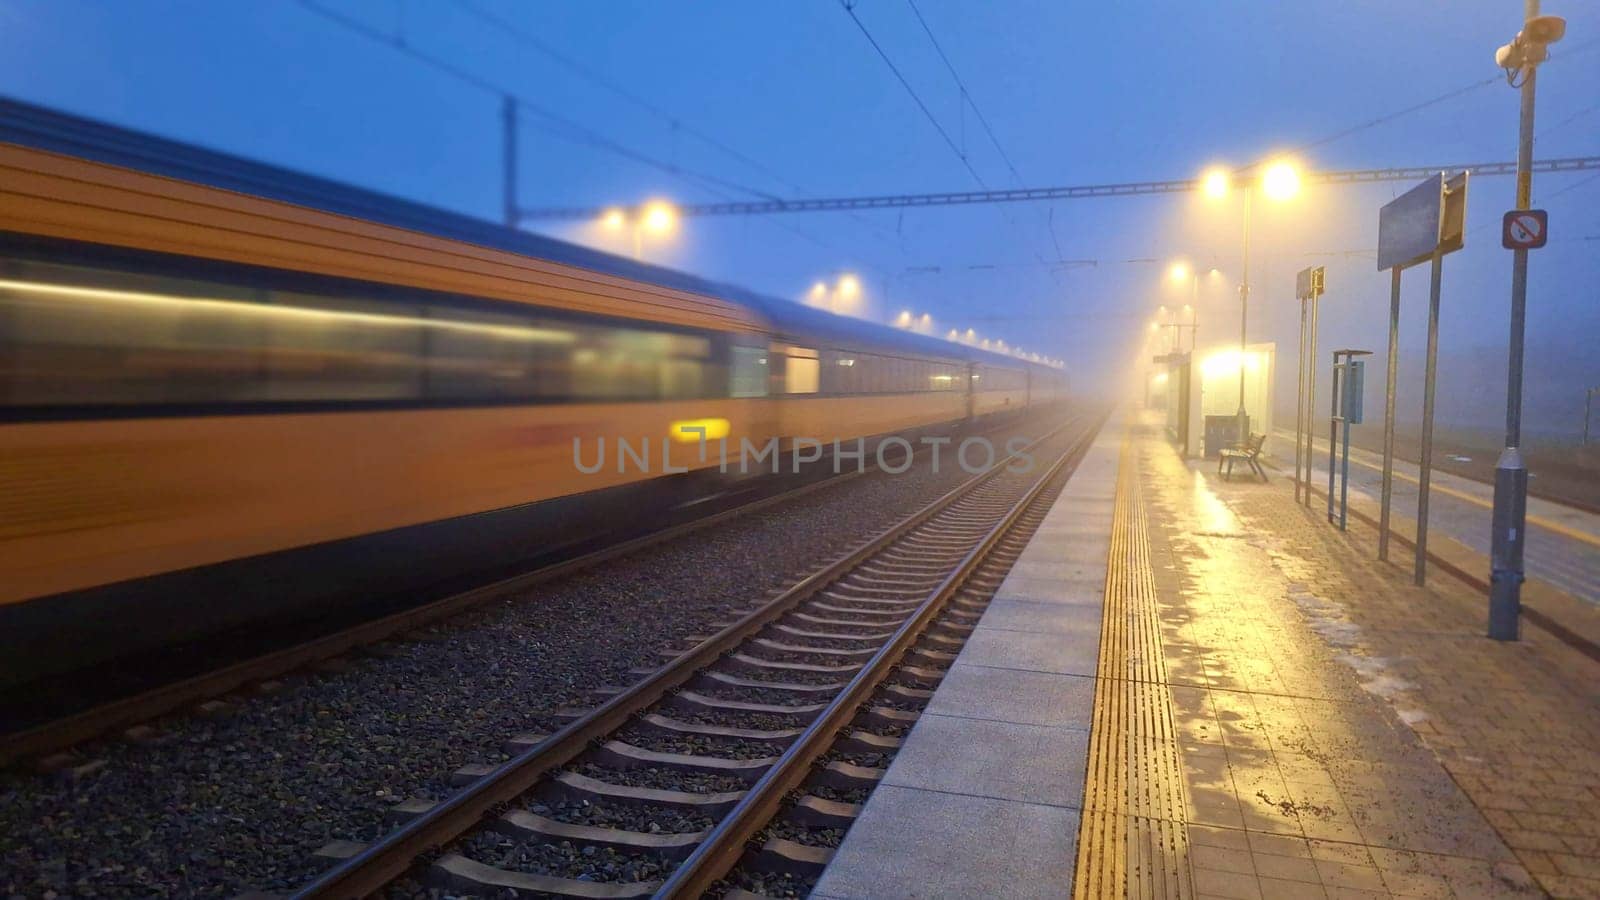 A passenger train entering the station in the fog. Night train passing the station. The concept of rail passenger transport. Night passenger train in fog by roman_nerud